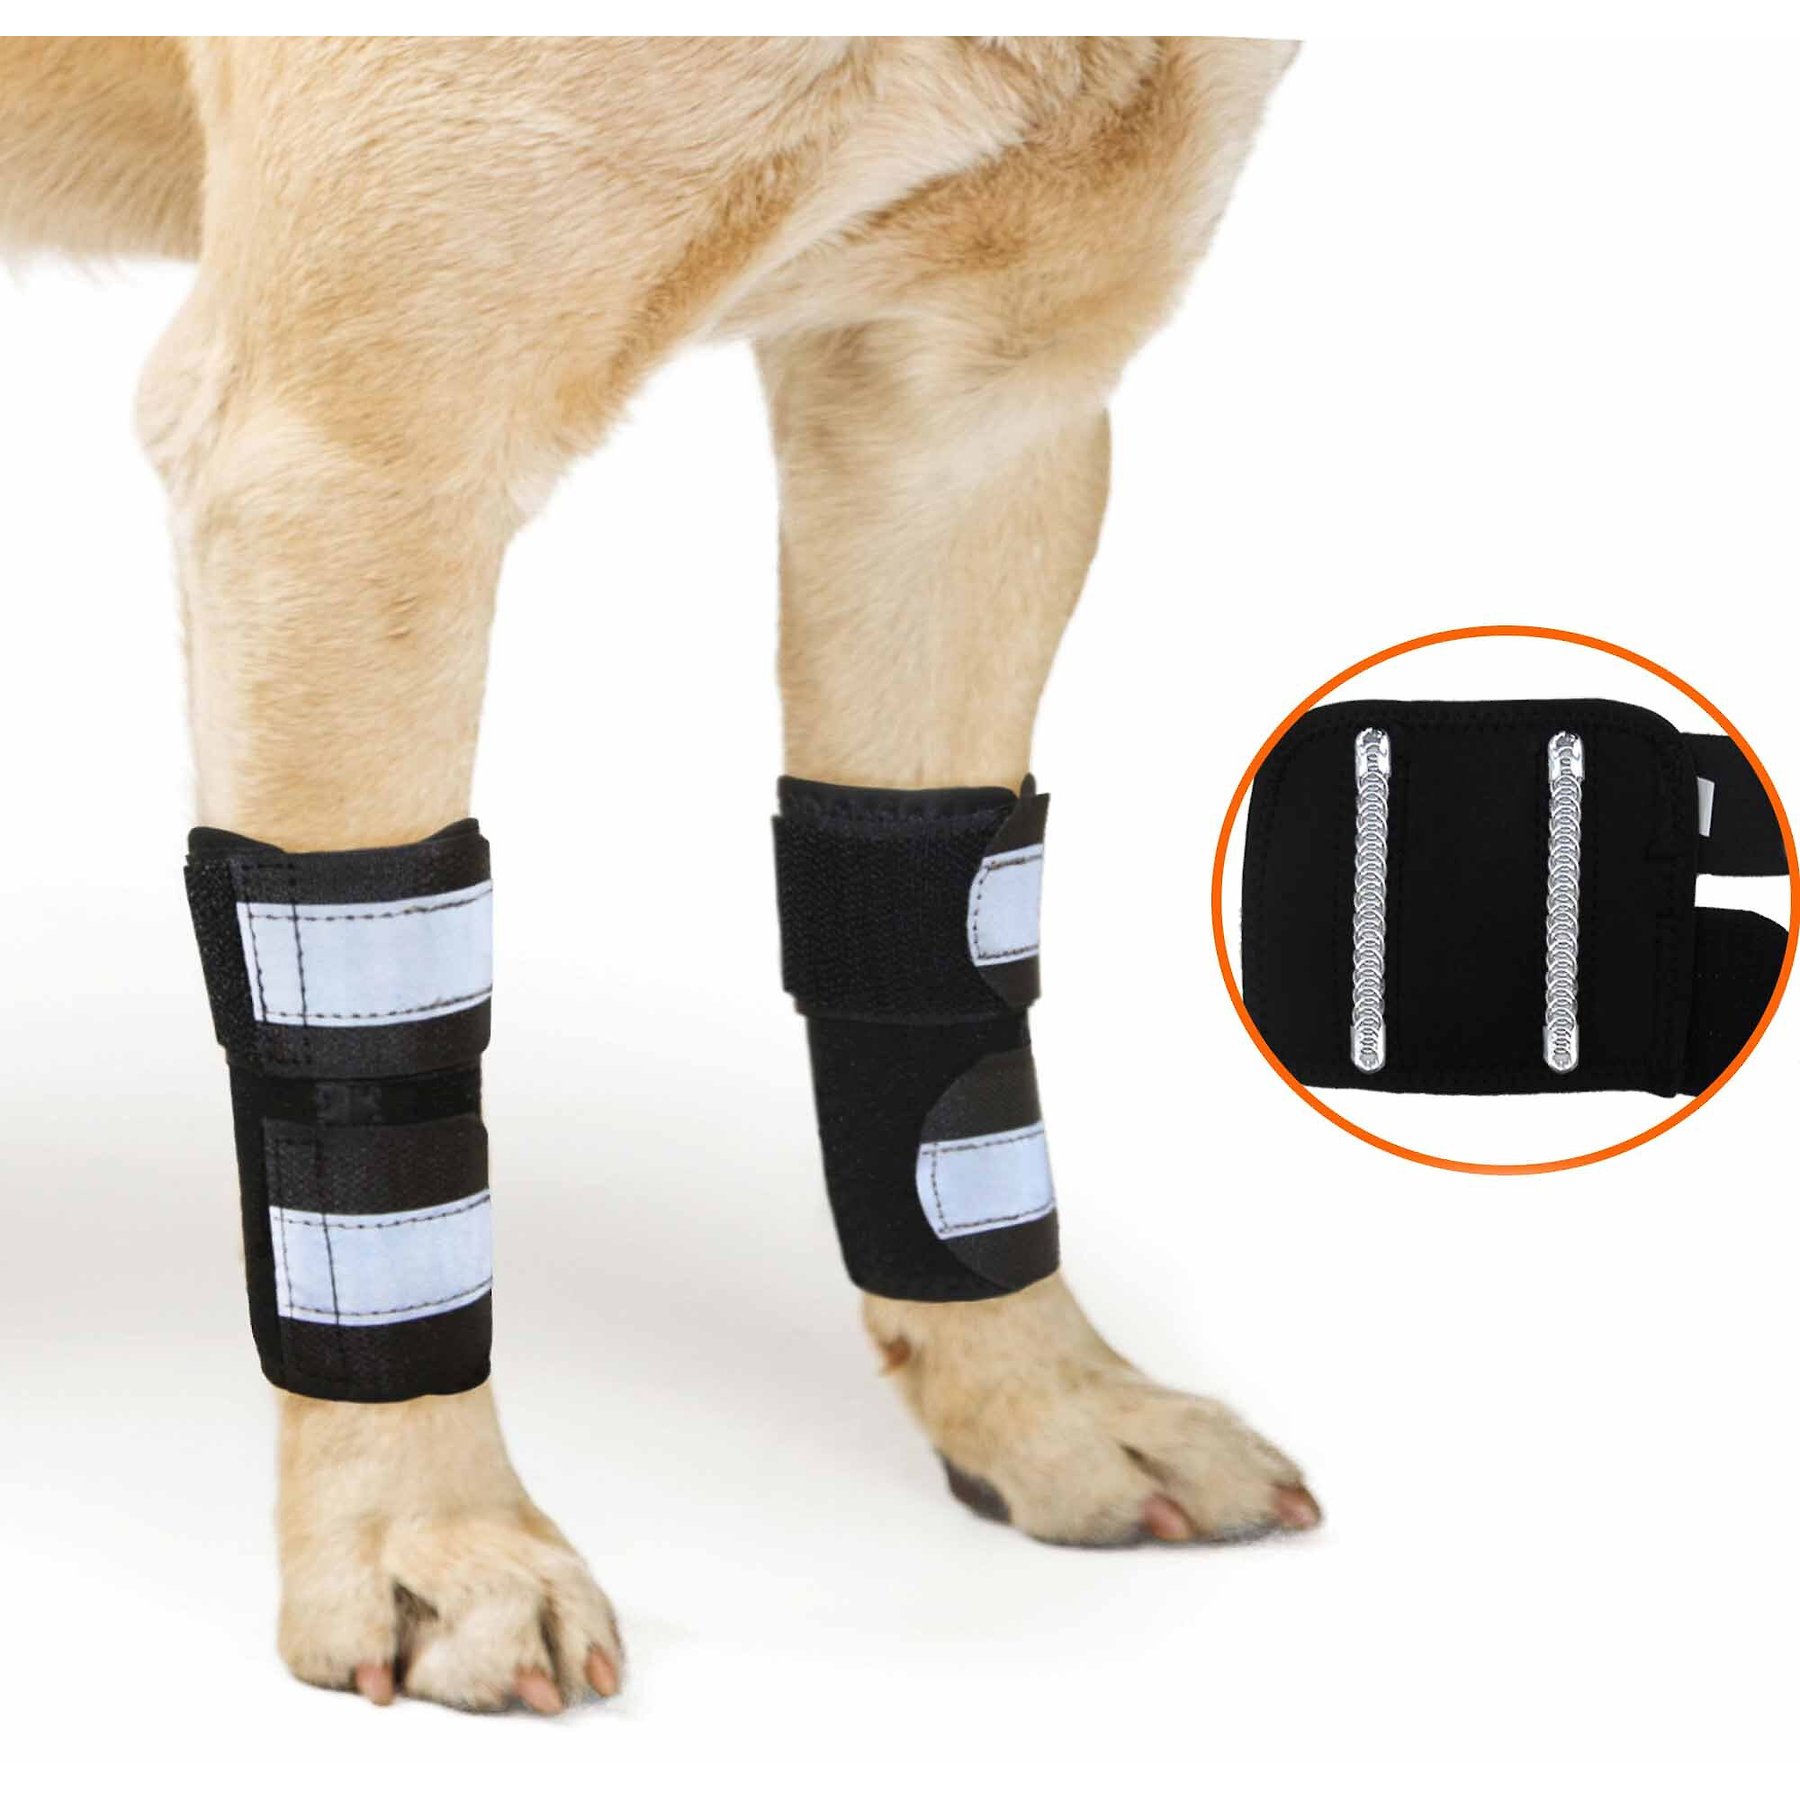 Dog Leg Braces for Back Legs,ACL Brace for Large Dogs Rear Legs, Joint  Compression Warps Support for Hind Leg with Injury Sprain, Wound Care and  Loss